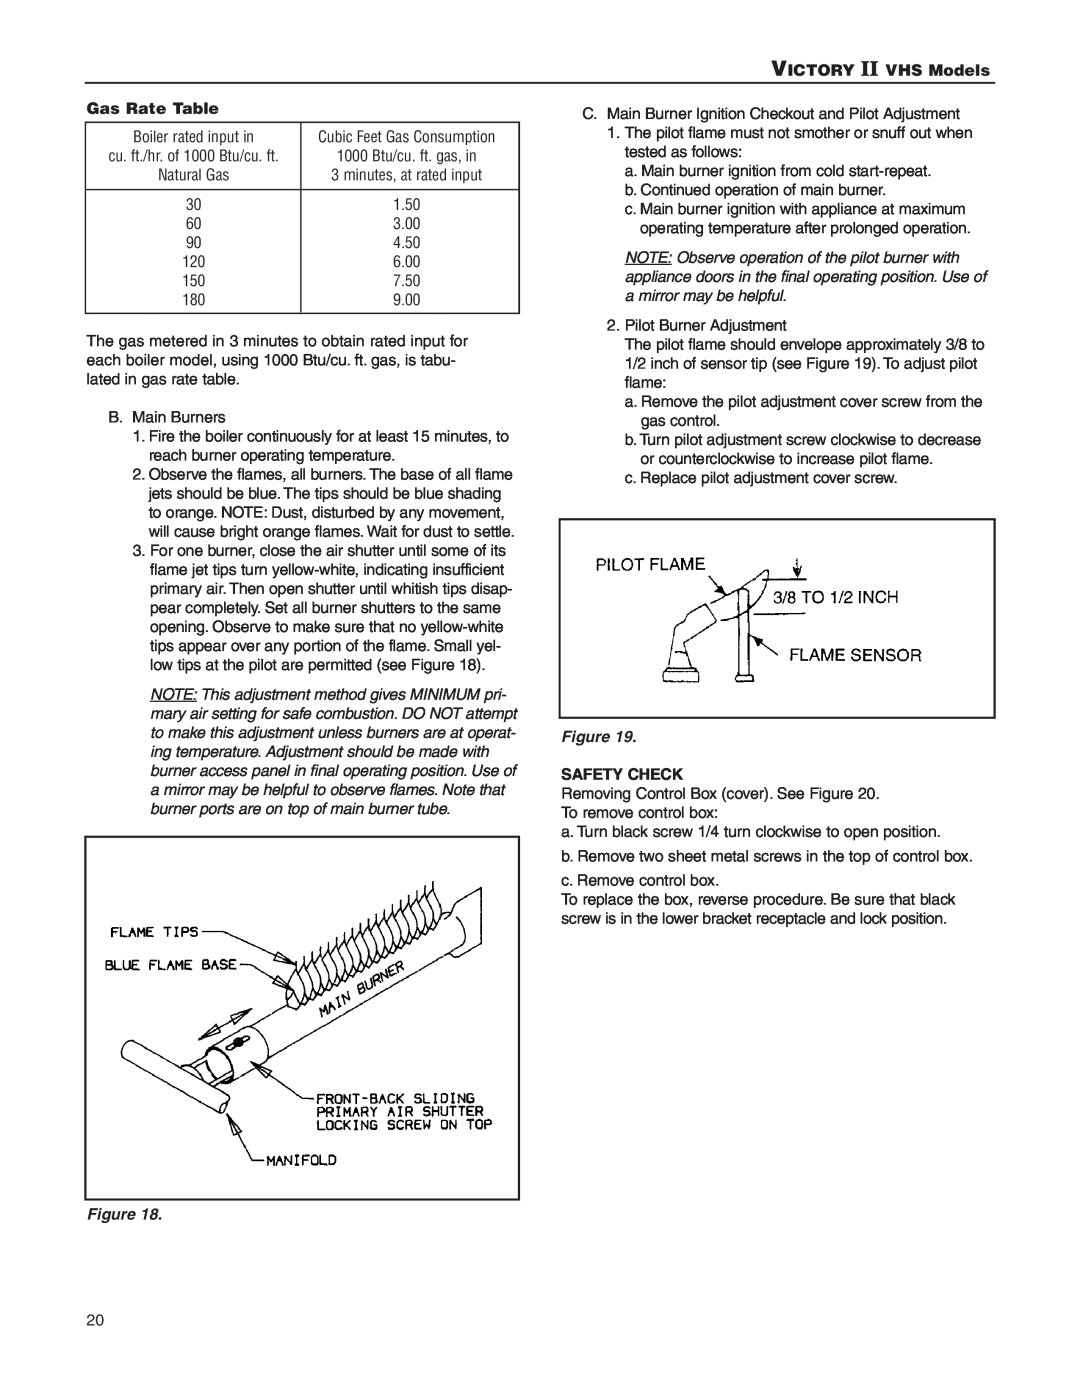 Slant/Fin VHS-30, VHS-180 installation instructions VICTORY II VHS Models, Gas Rate Table, Safety Check 